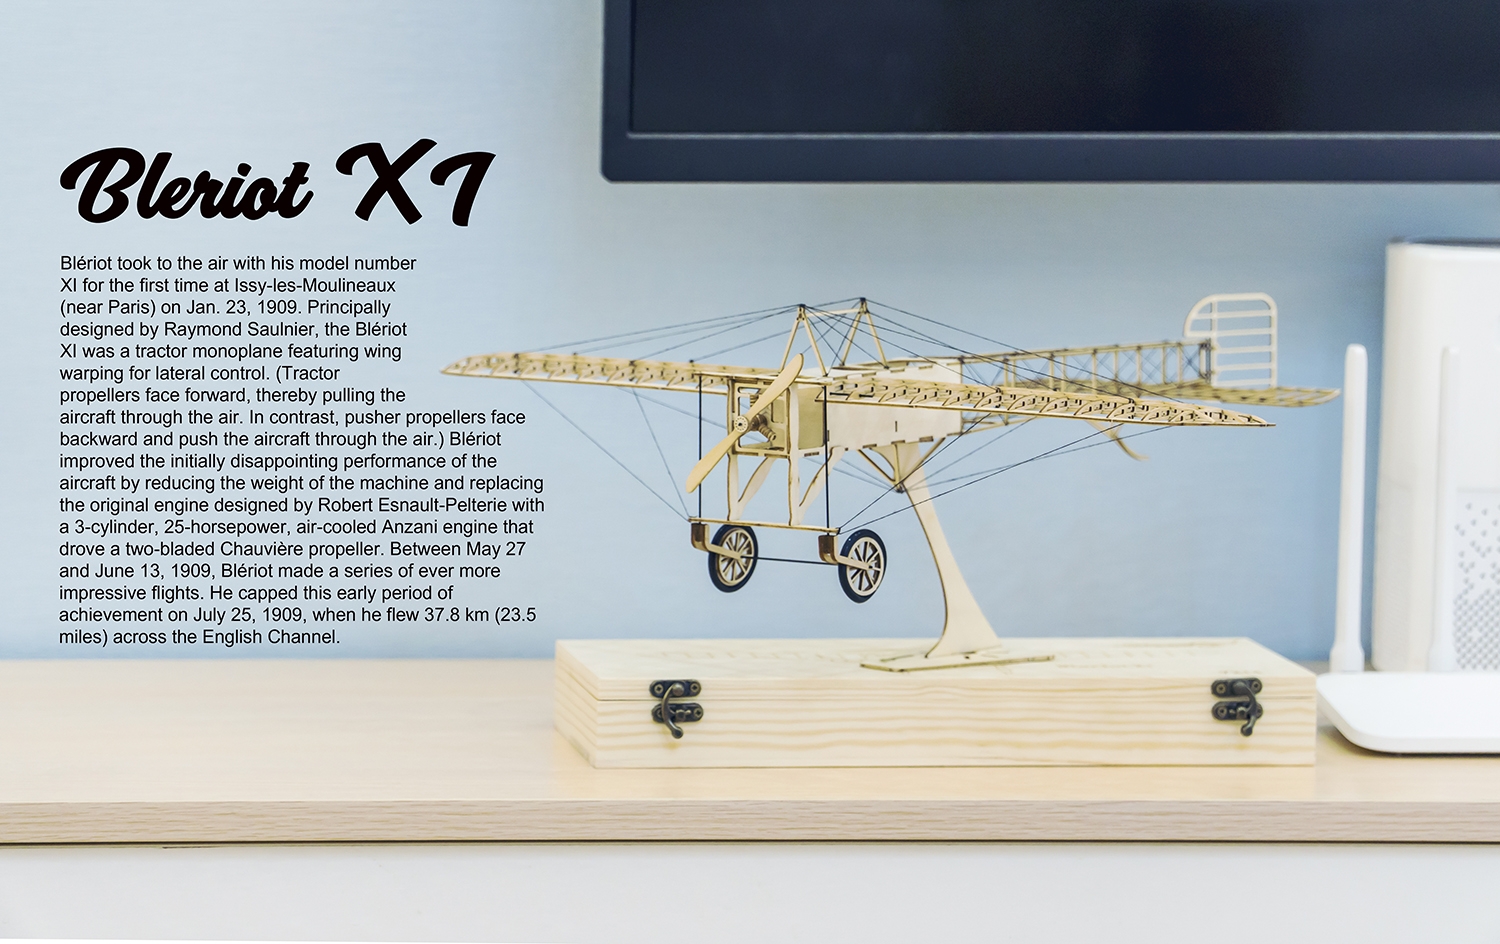 AEORC Static Wooden Aircraft Model VX14 Bleriot XI 1:23 400mm Wingspan Building DIY Airplane KIT